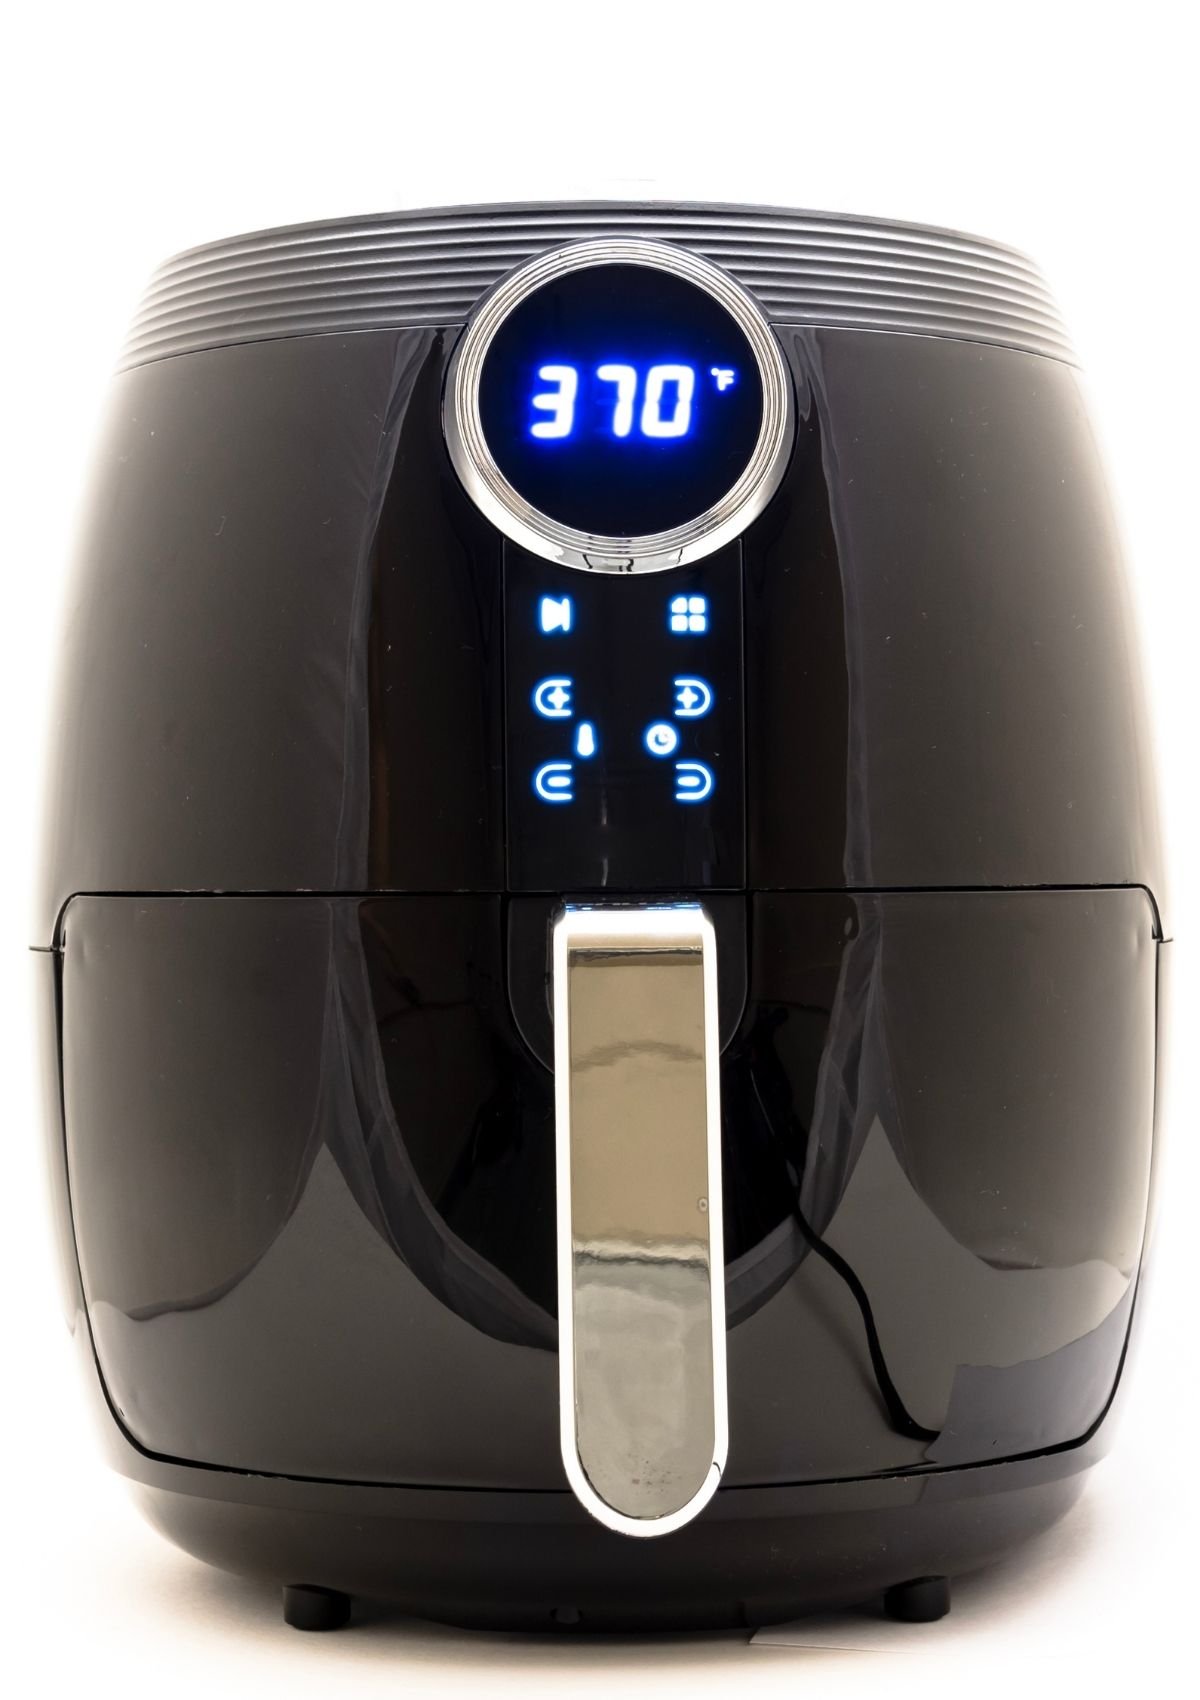 black air fryer with temperature set to 370 F.